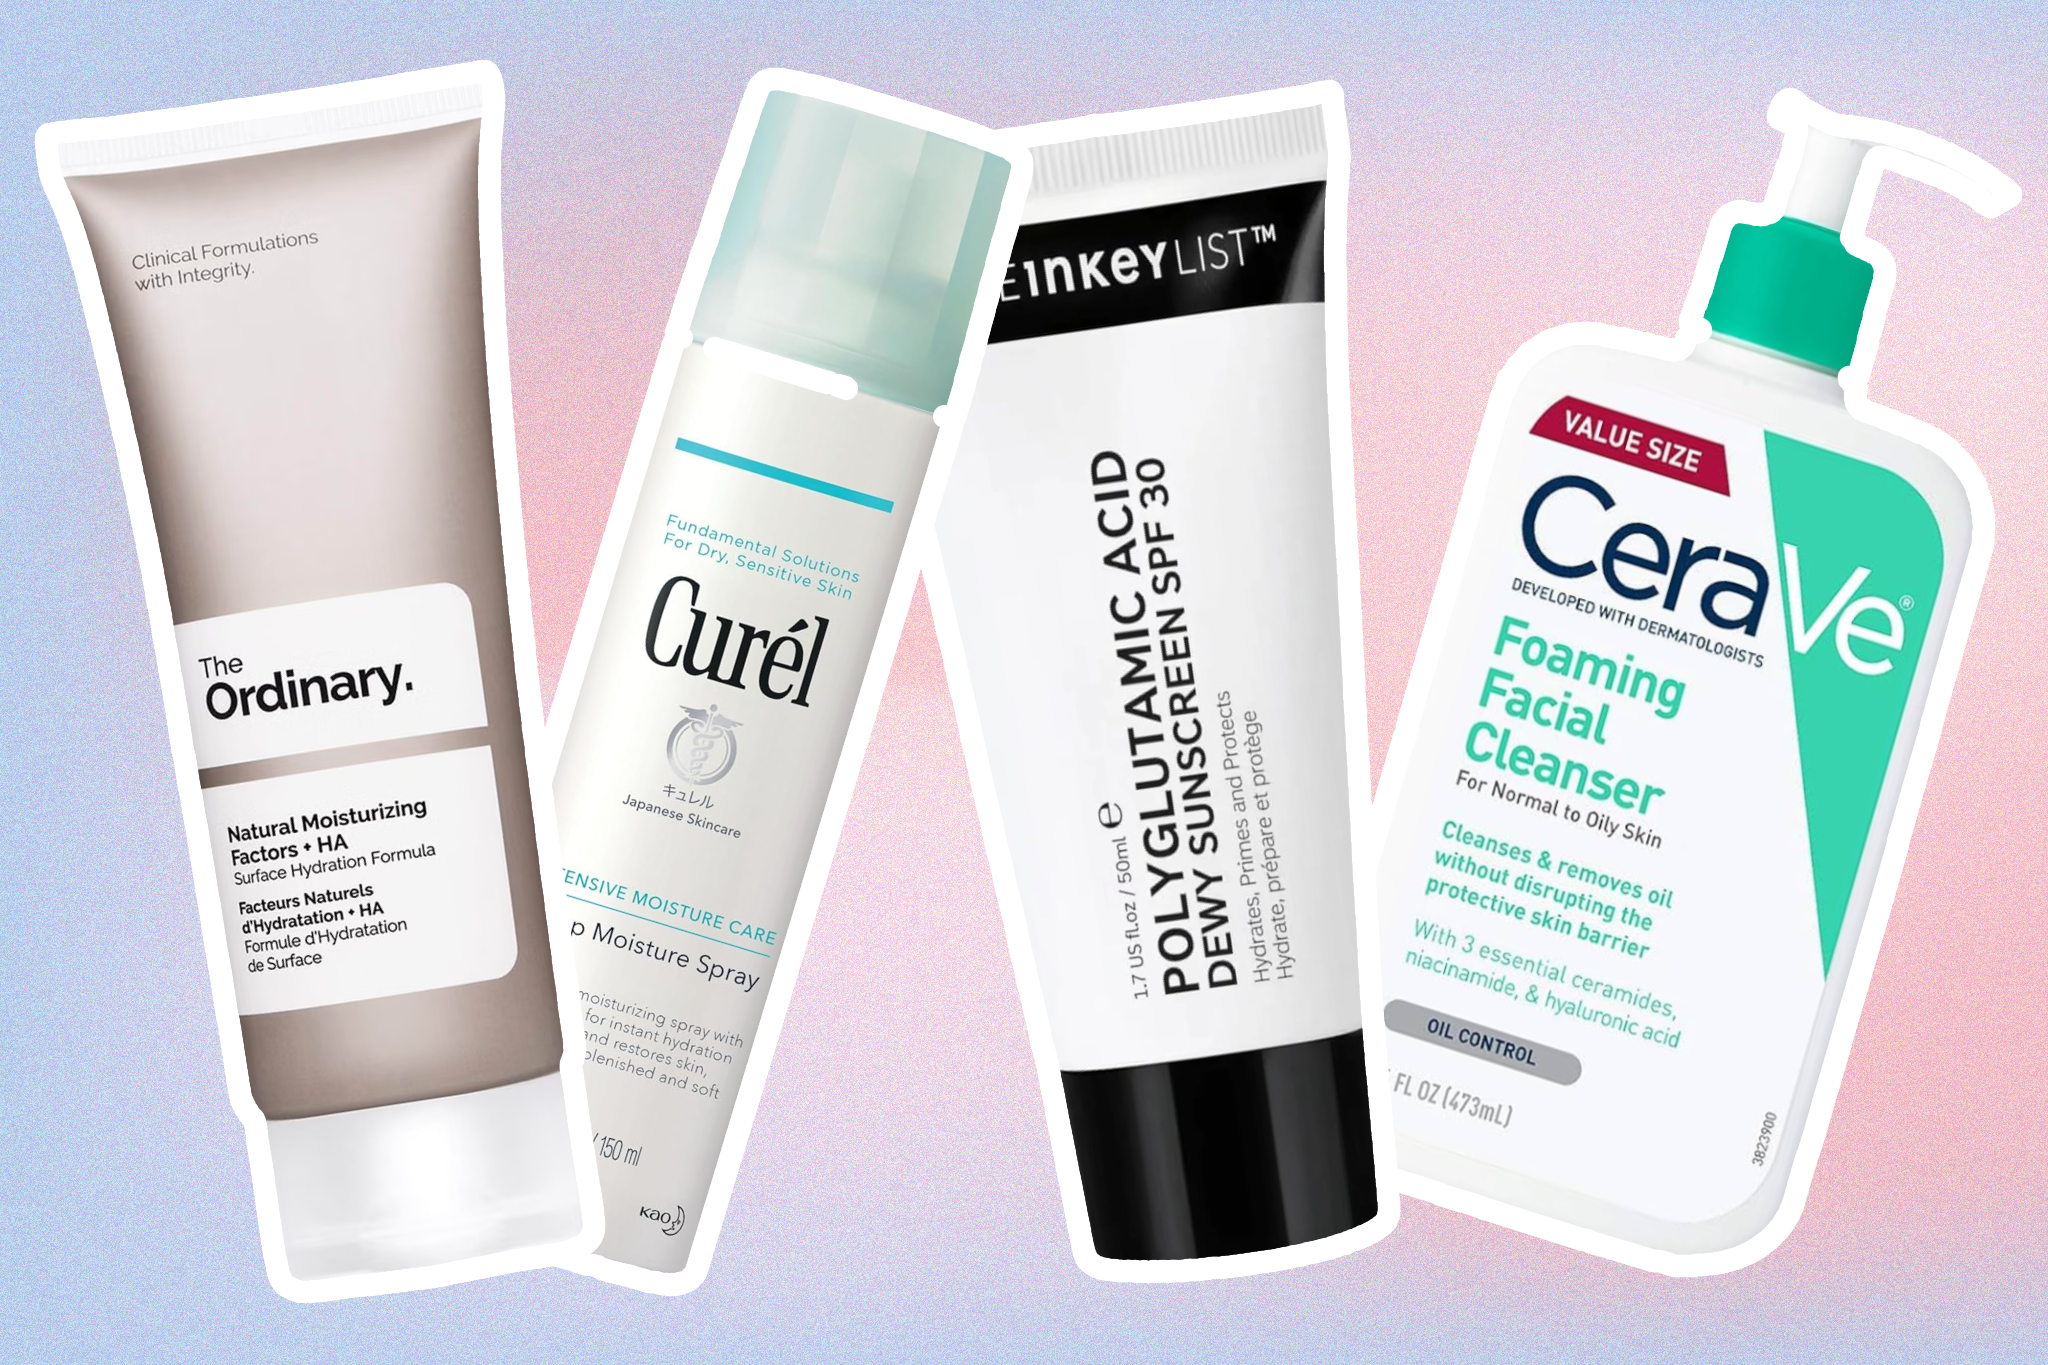 With ever-changing hormones doing their worst, it’s a good time for teens to embrace a simple, targeted skincare routine